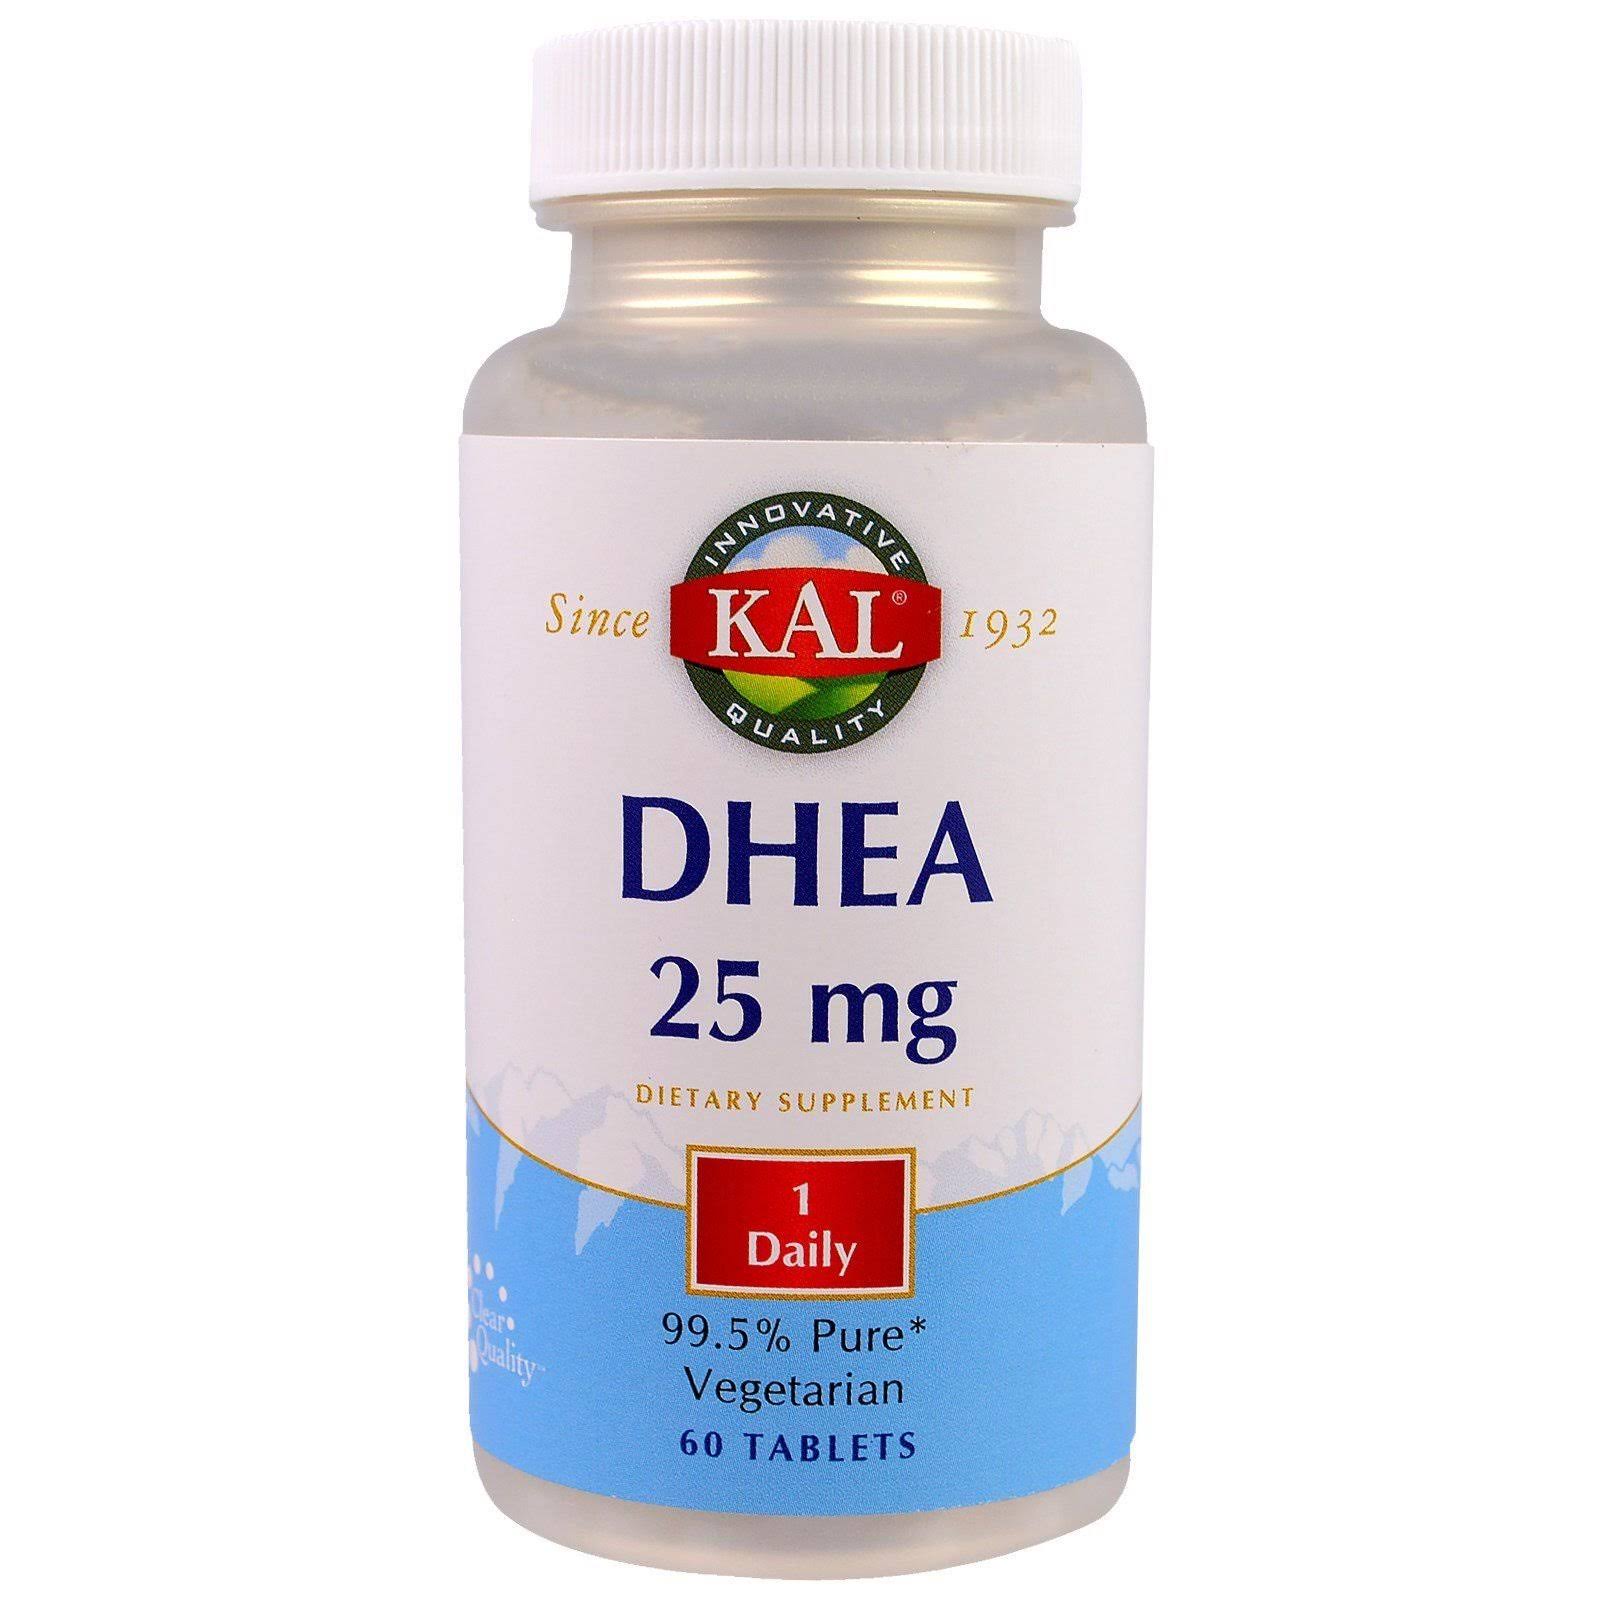 Kal Dhea Vegetarian Tablets Dietary Supplement - 60ct, 25mg